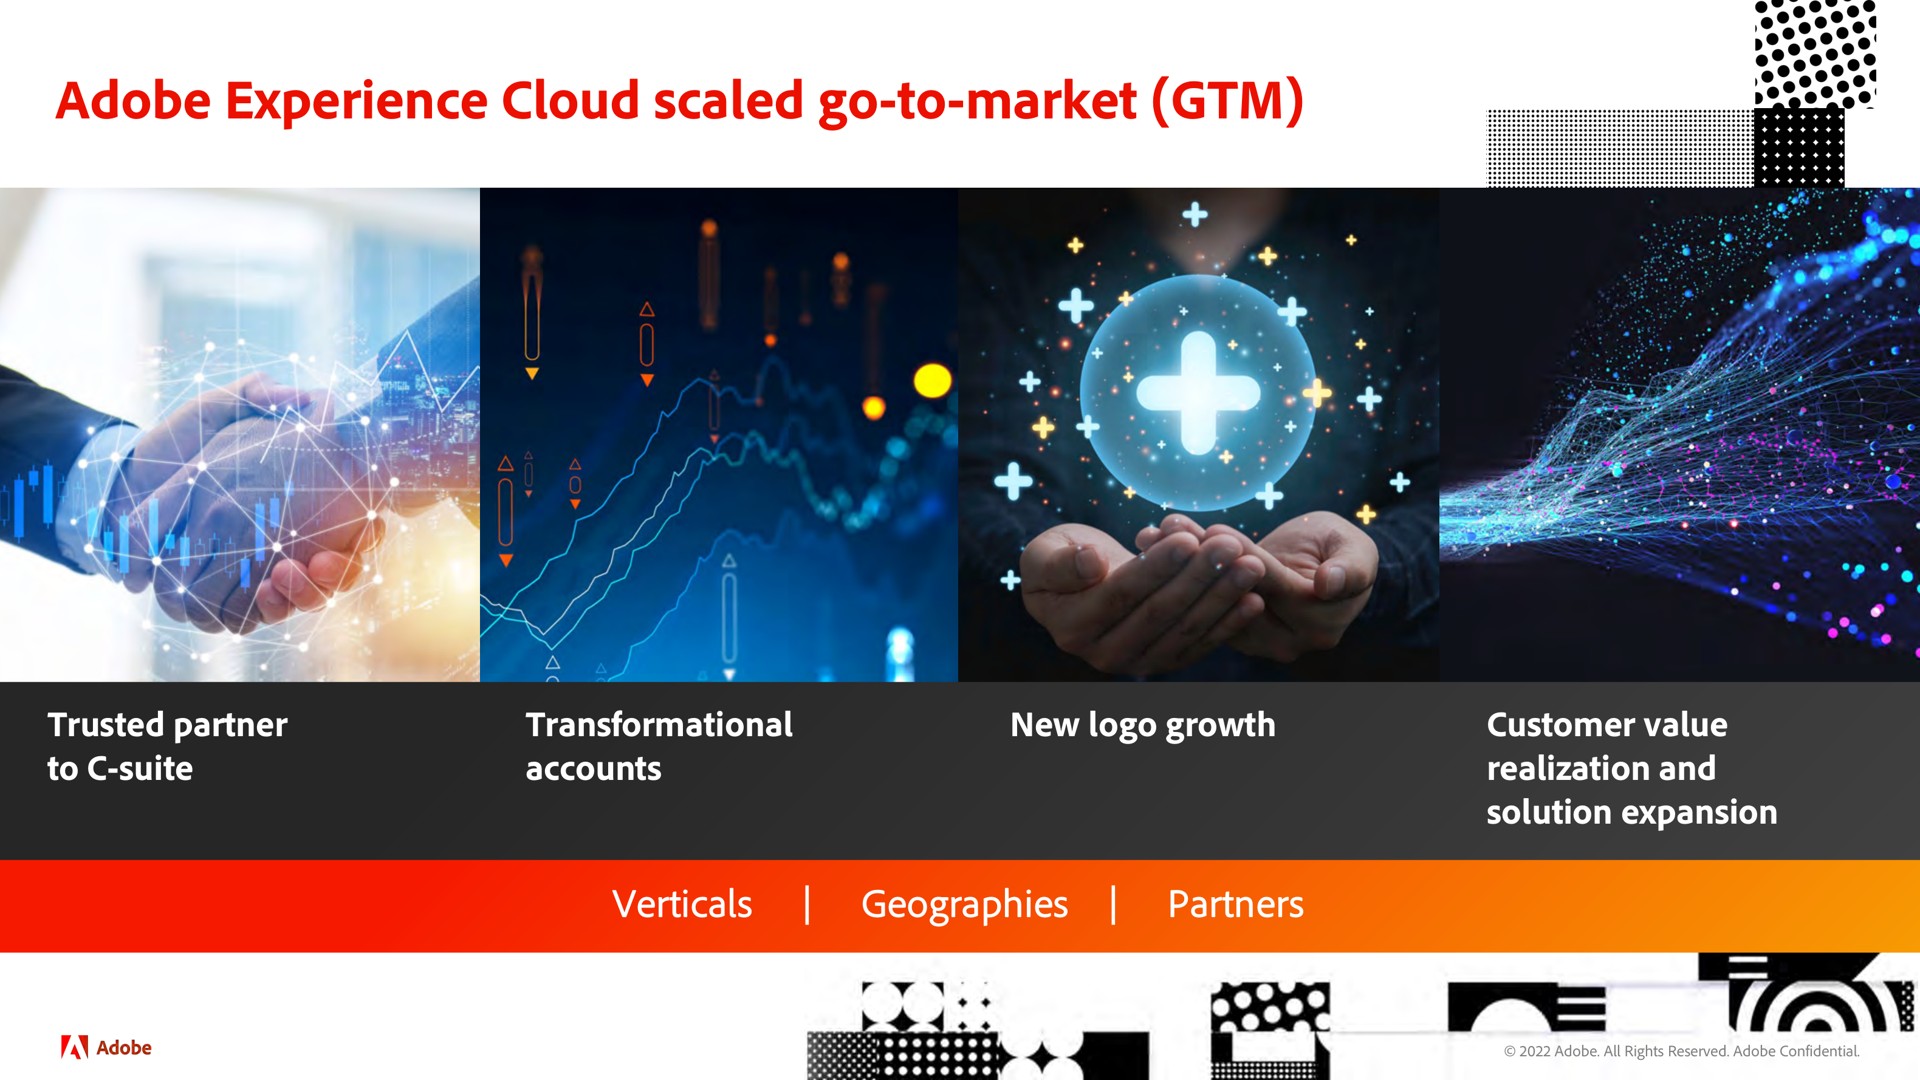 adobe experience cloud scaled go to market | Adobe